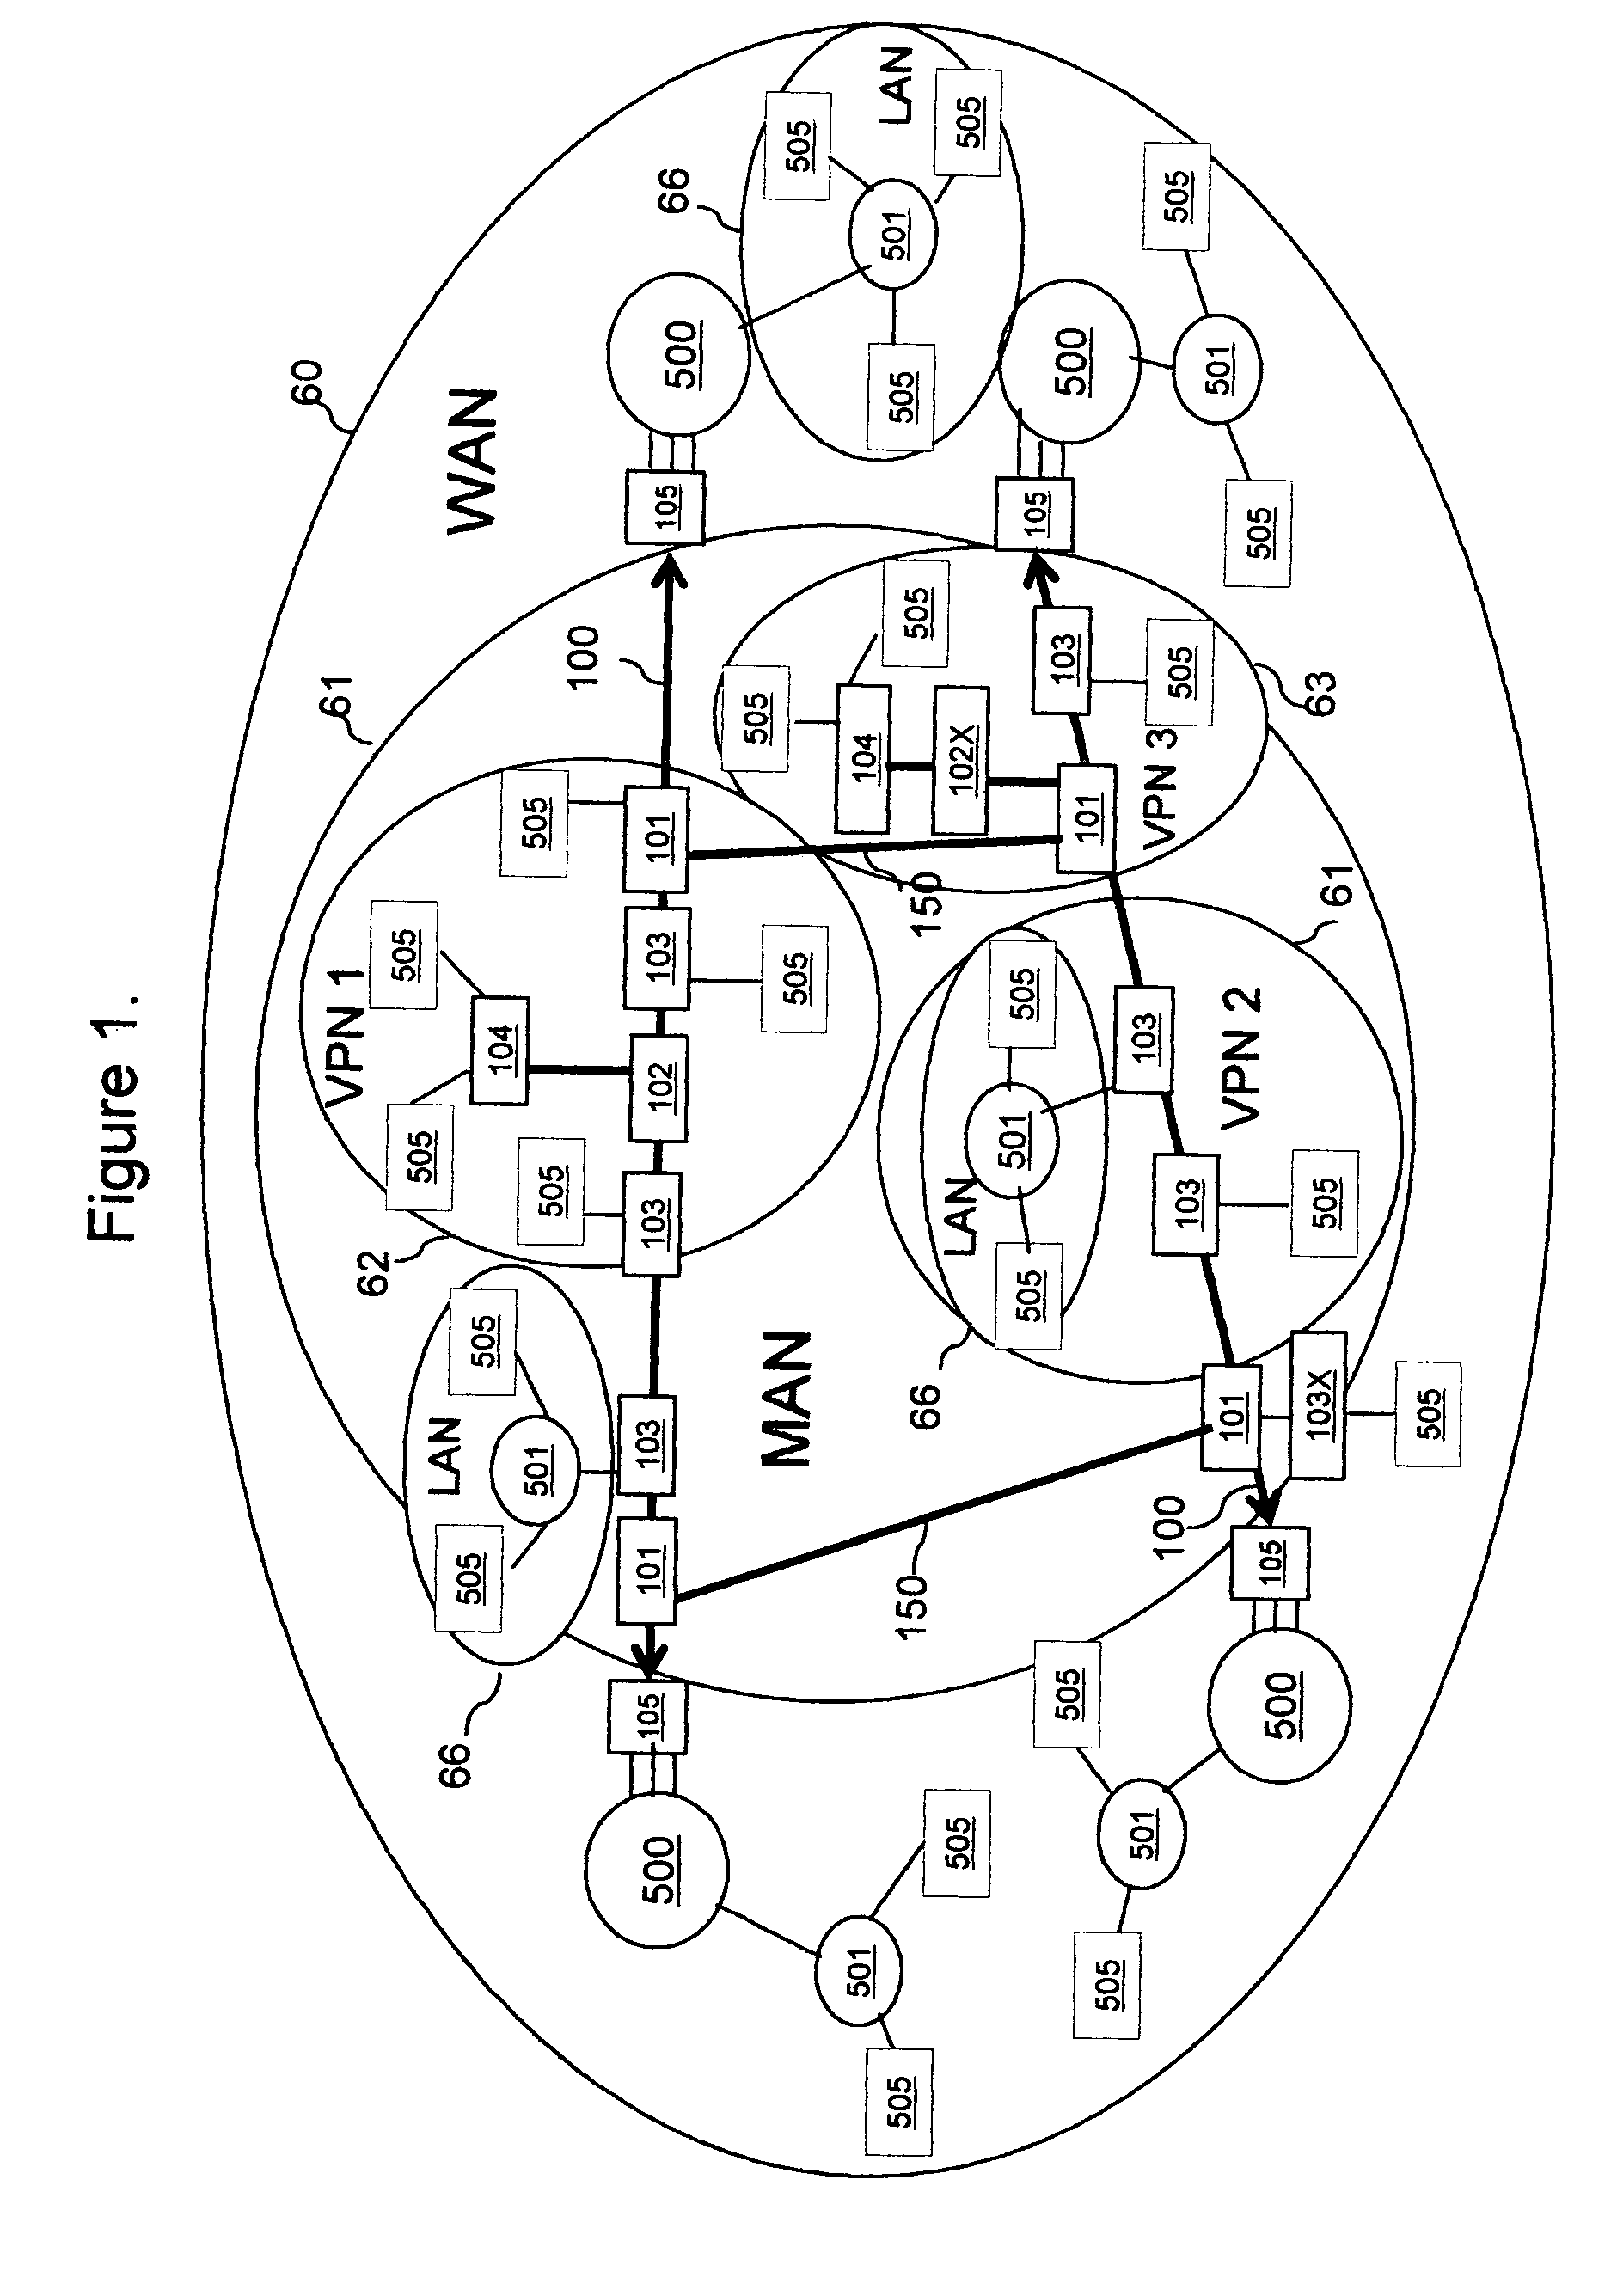 Process of optical WDM bus networking with DWDM expansion for the method of protected point to point, point to multipoint and broadcast connections